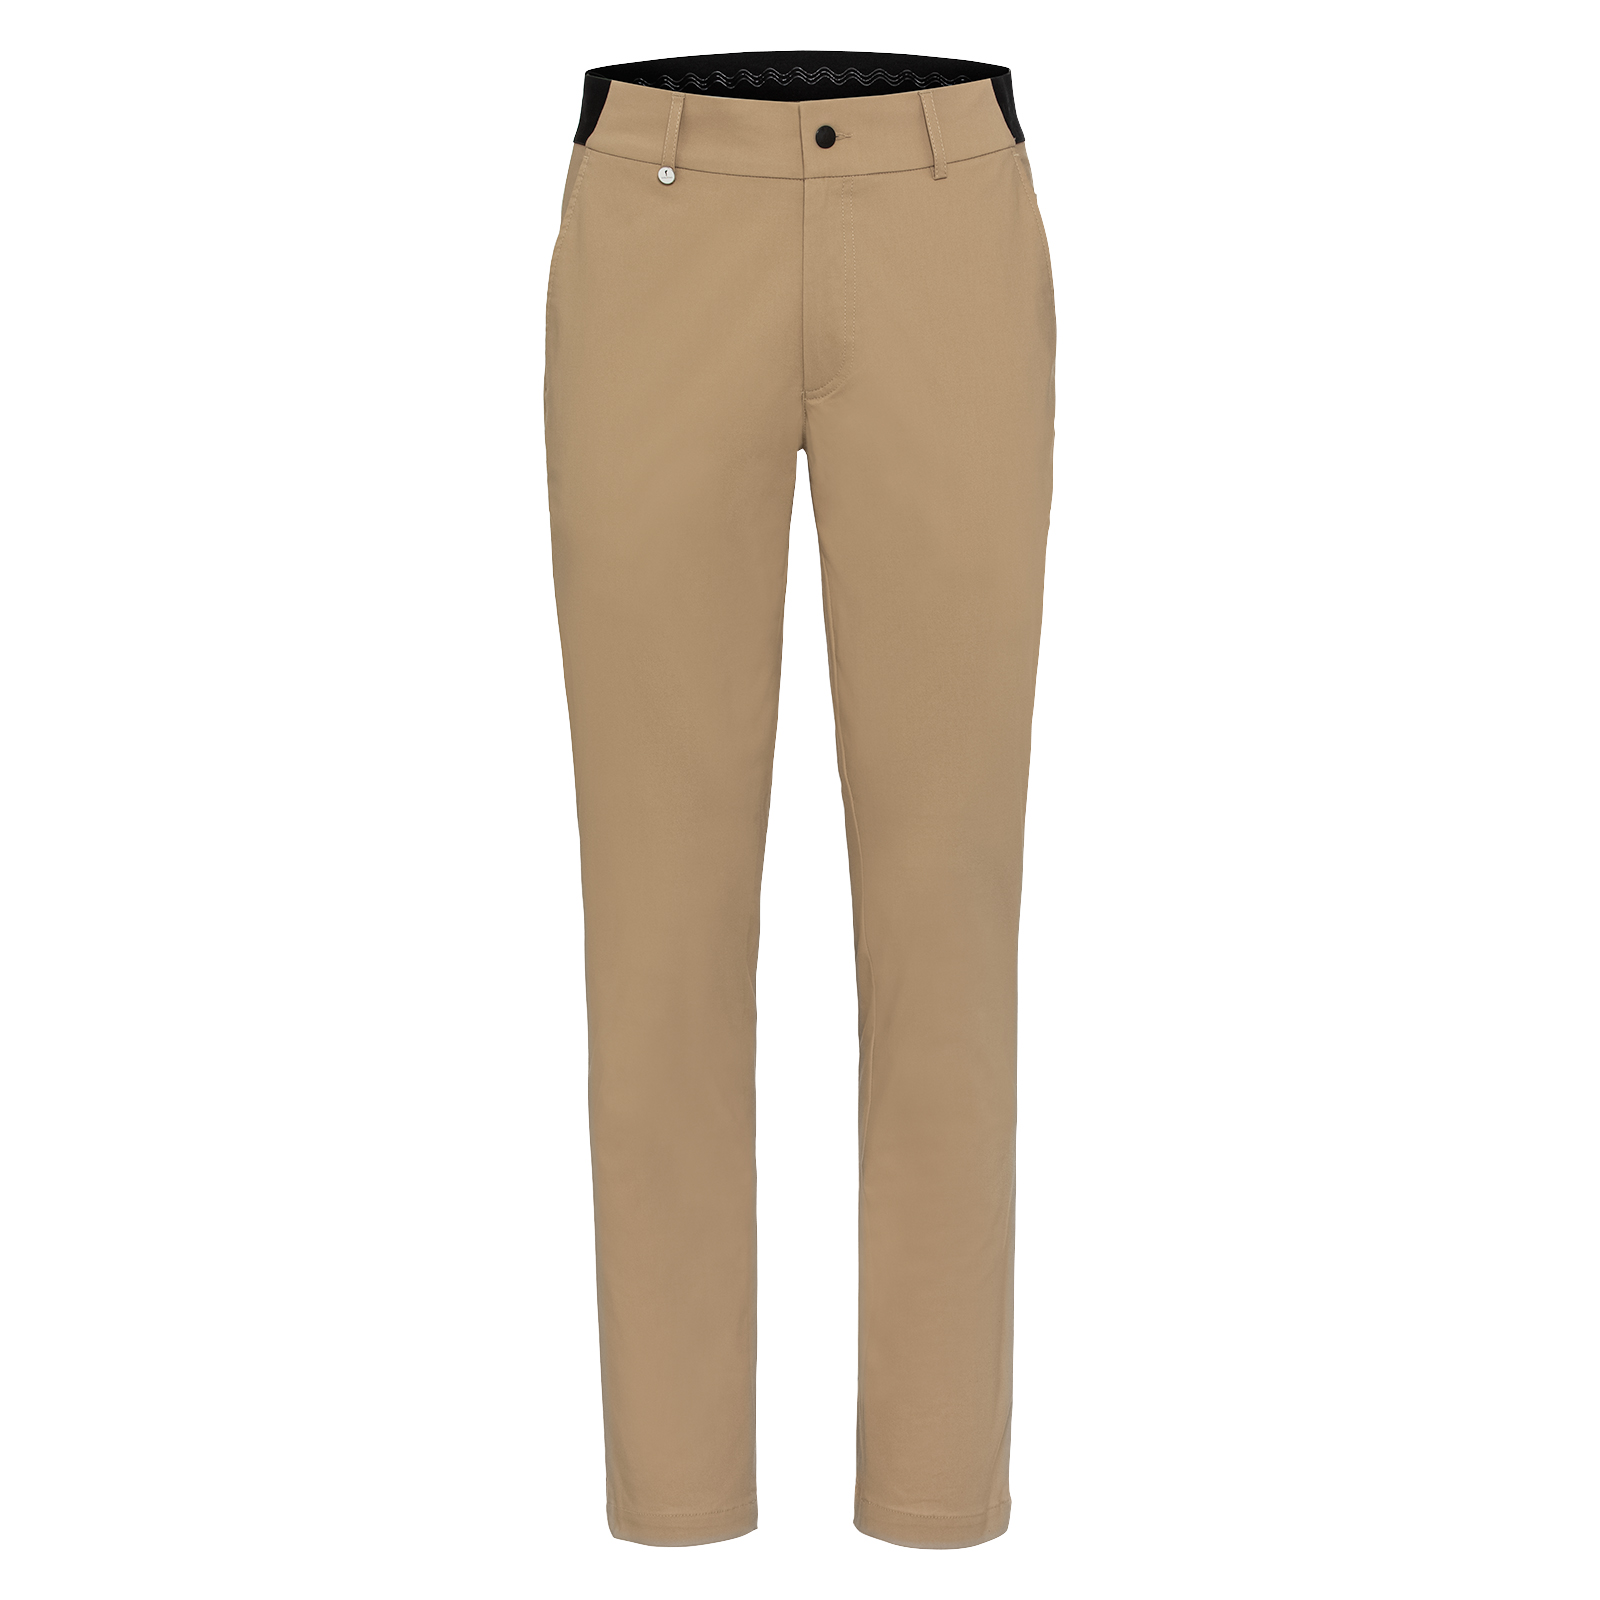 Men's extra slim fit golf trousers with sun protection 